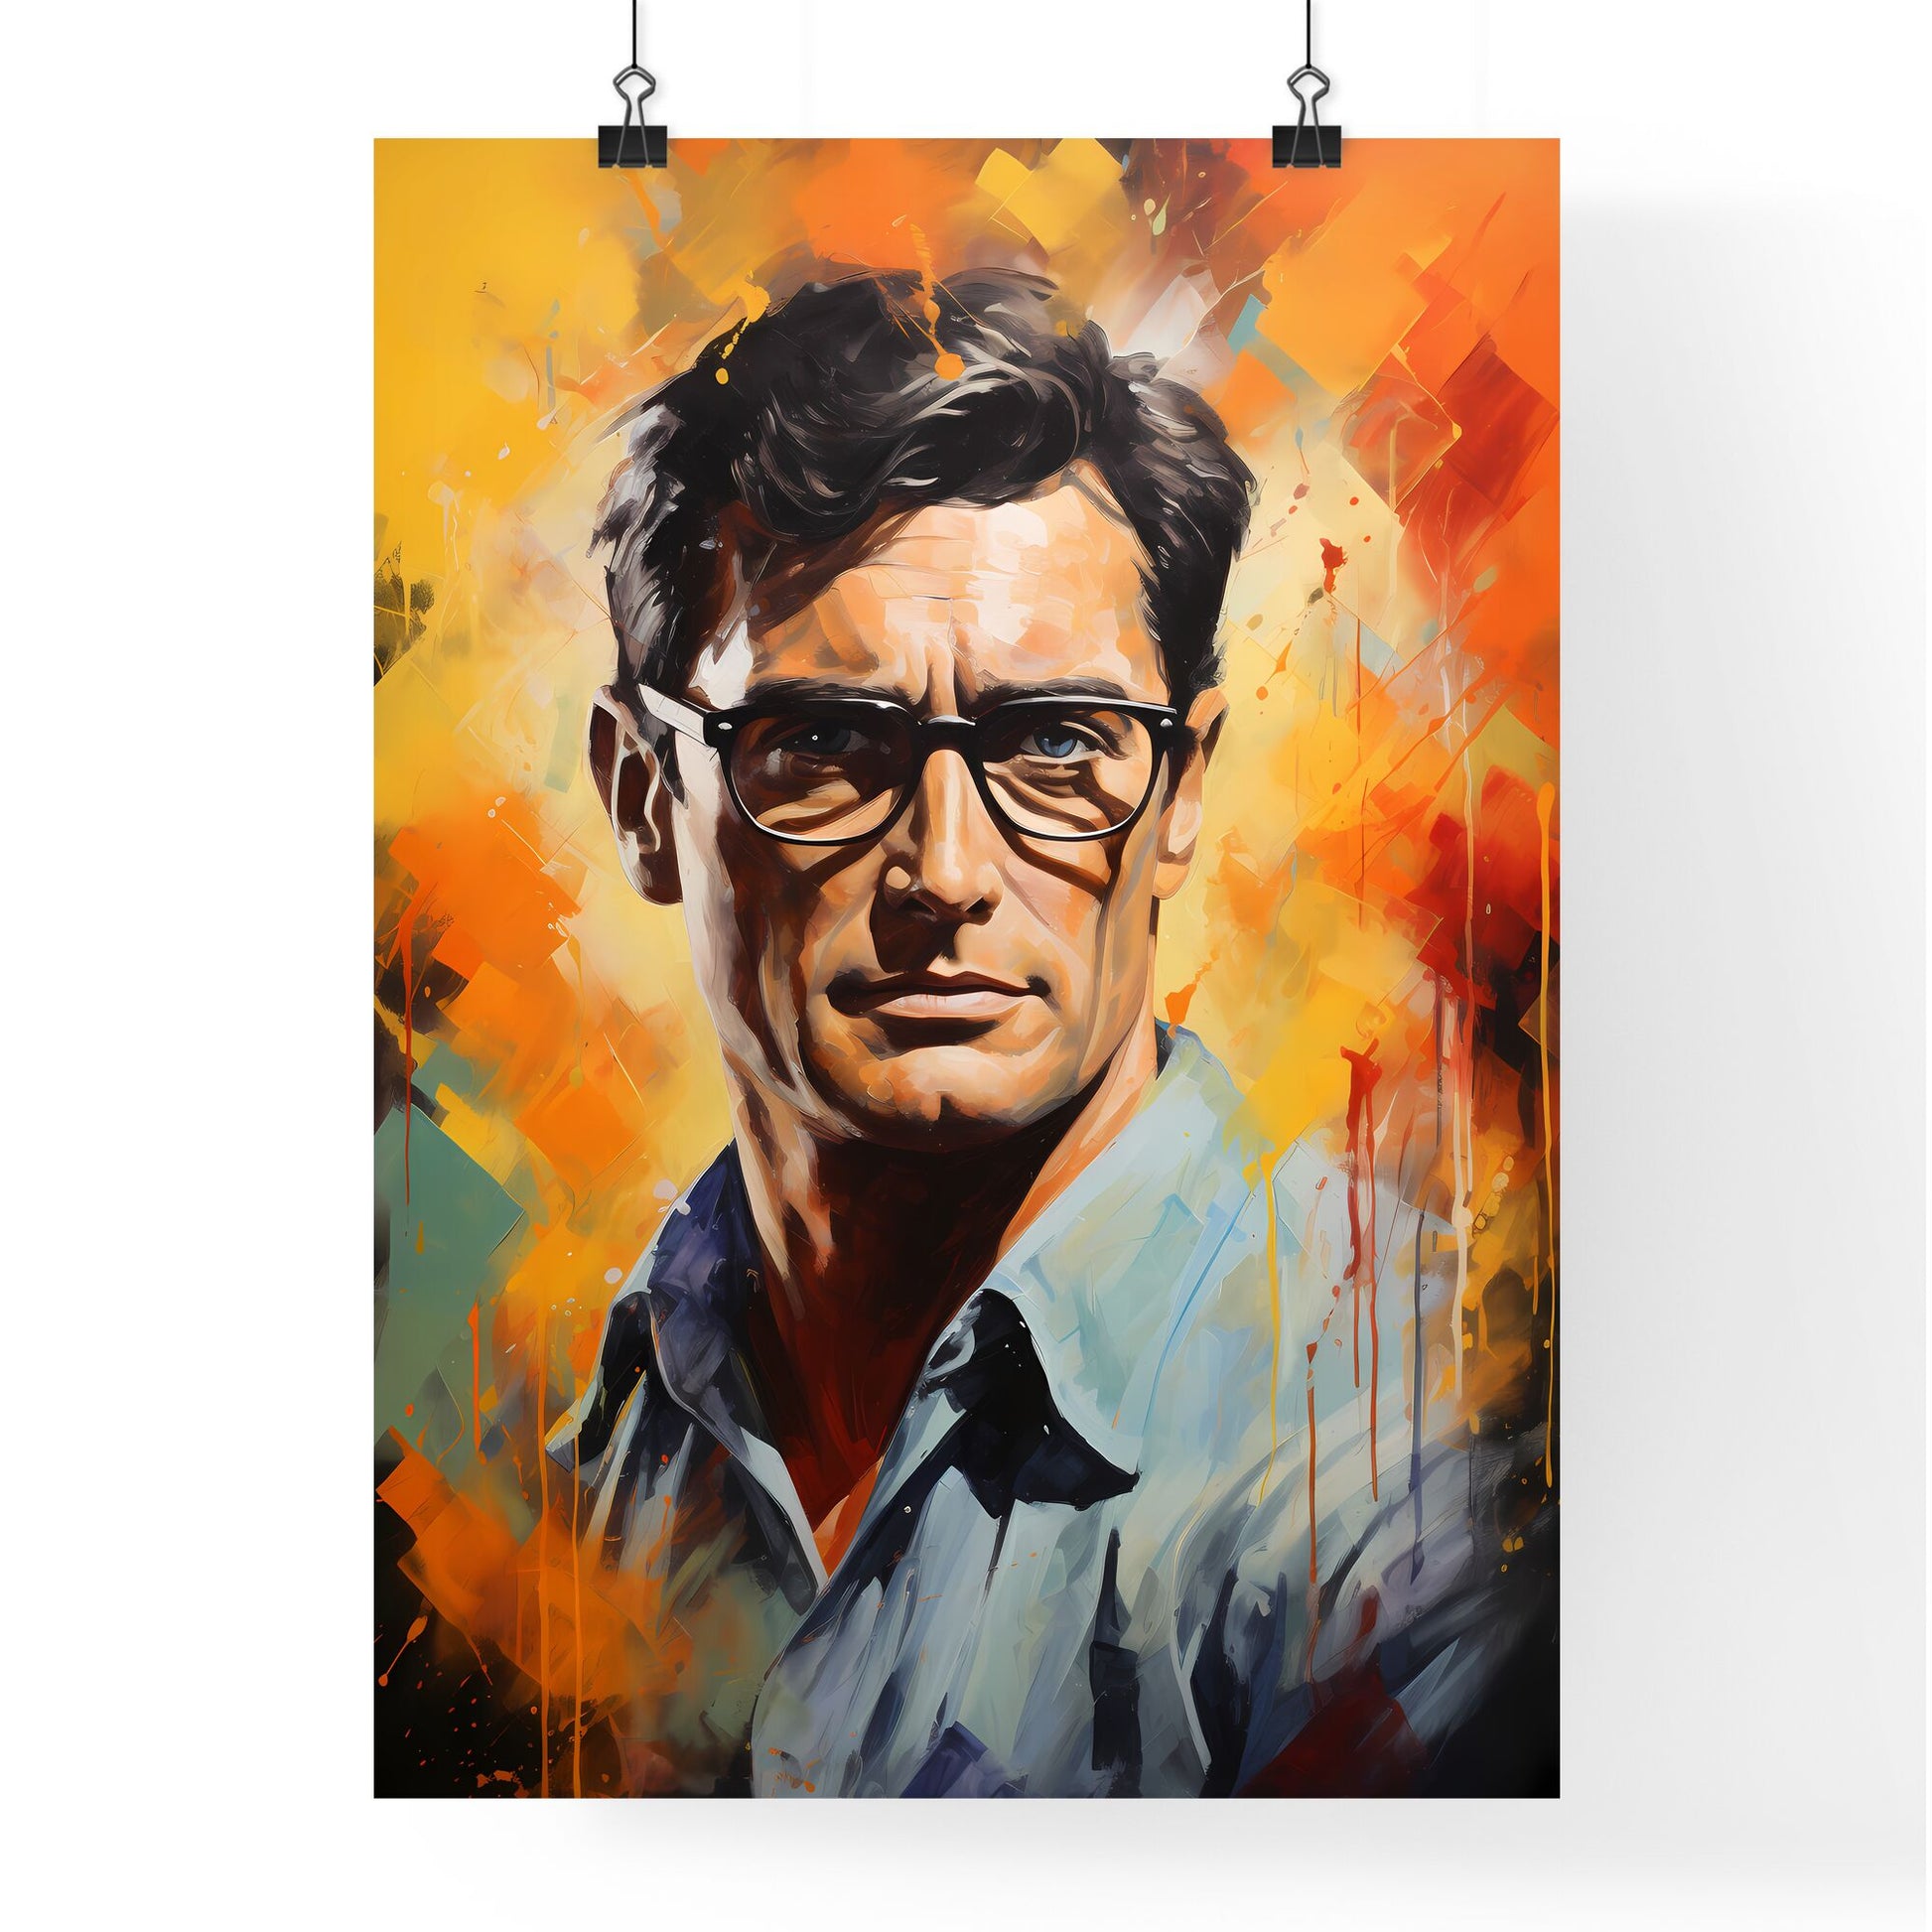 Atticus Finch Gregory Peck - A Painting Of A Man With Glasses Default Title